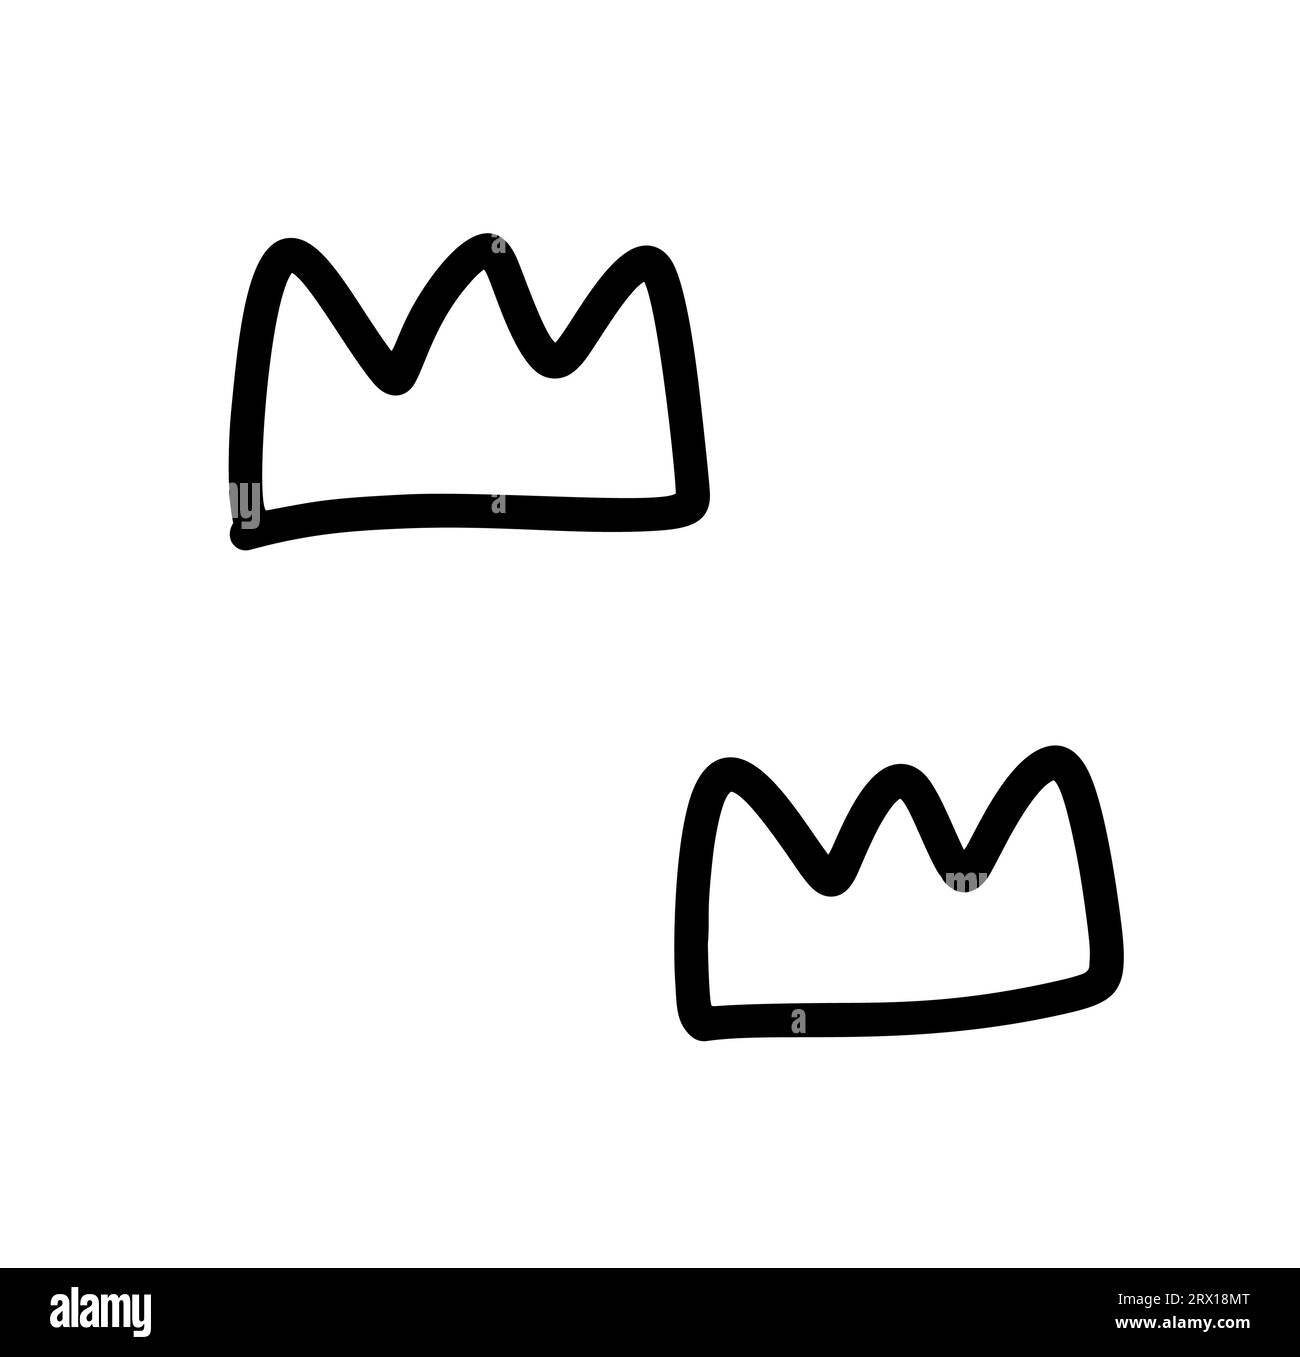 Hand drawn doodle crowns. King crown pattern vector element. Line art prince and princess luxurious head accessories for web design, greeting card Stock Vector